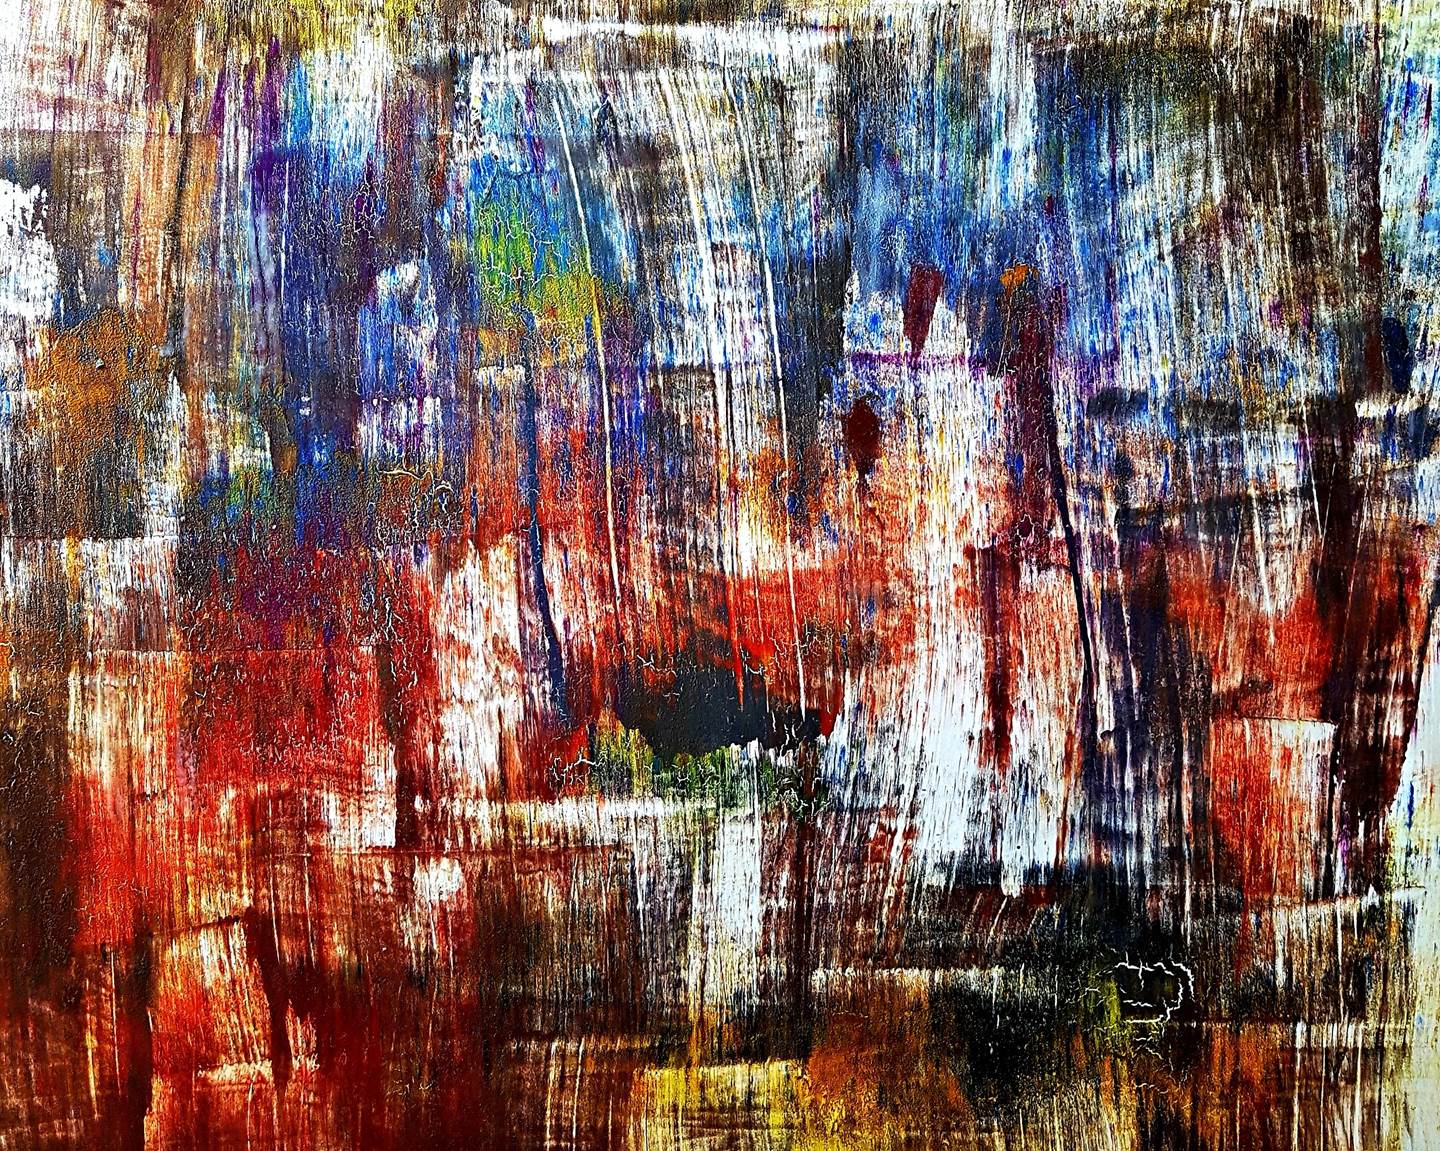 Time to time (n.257), original Abstract Acrylic Painting by Alessio Mazzarulli